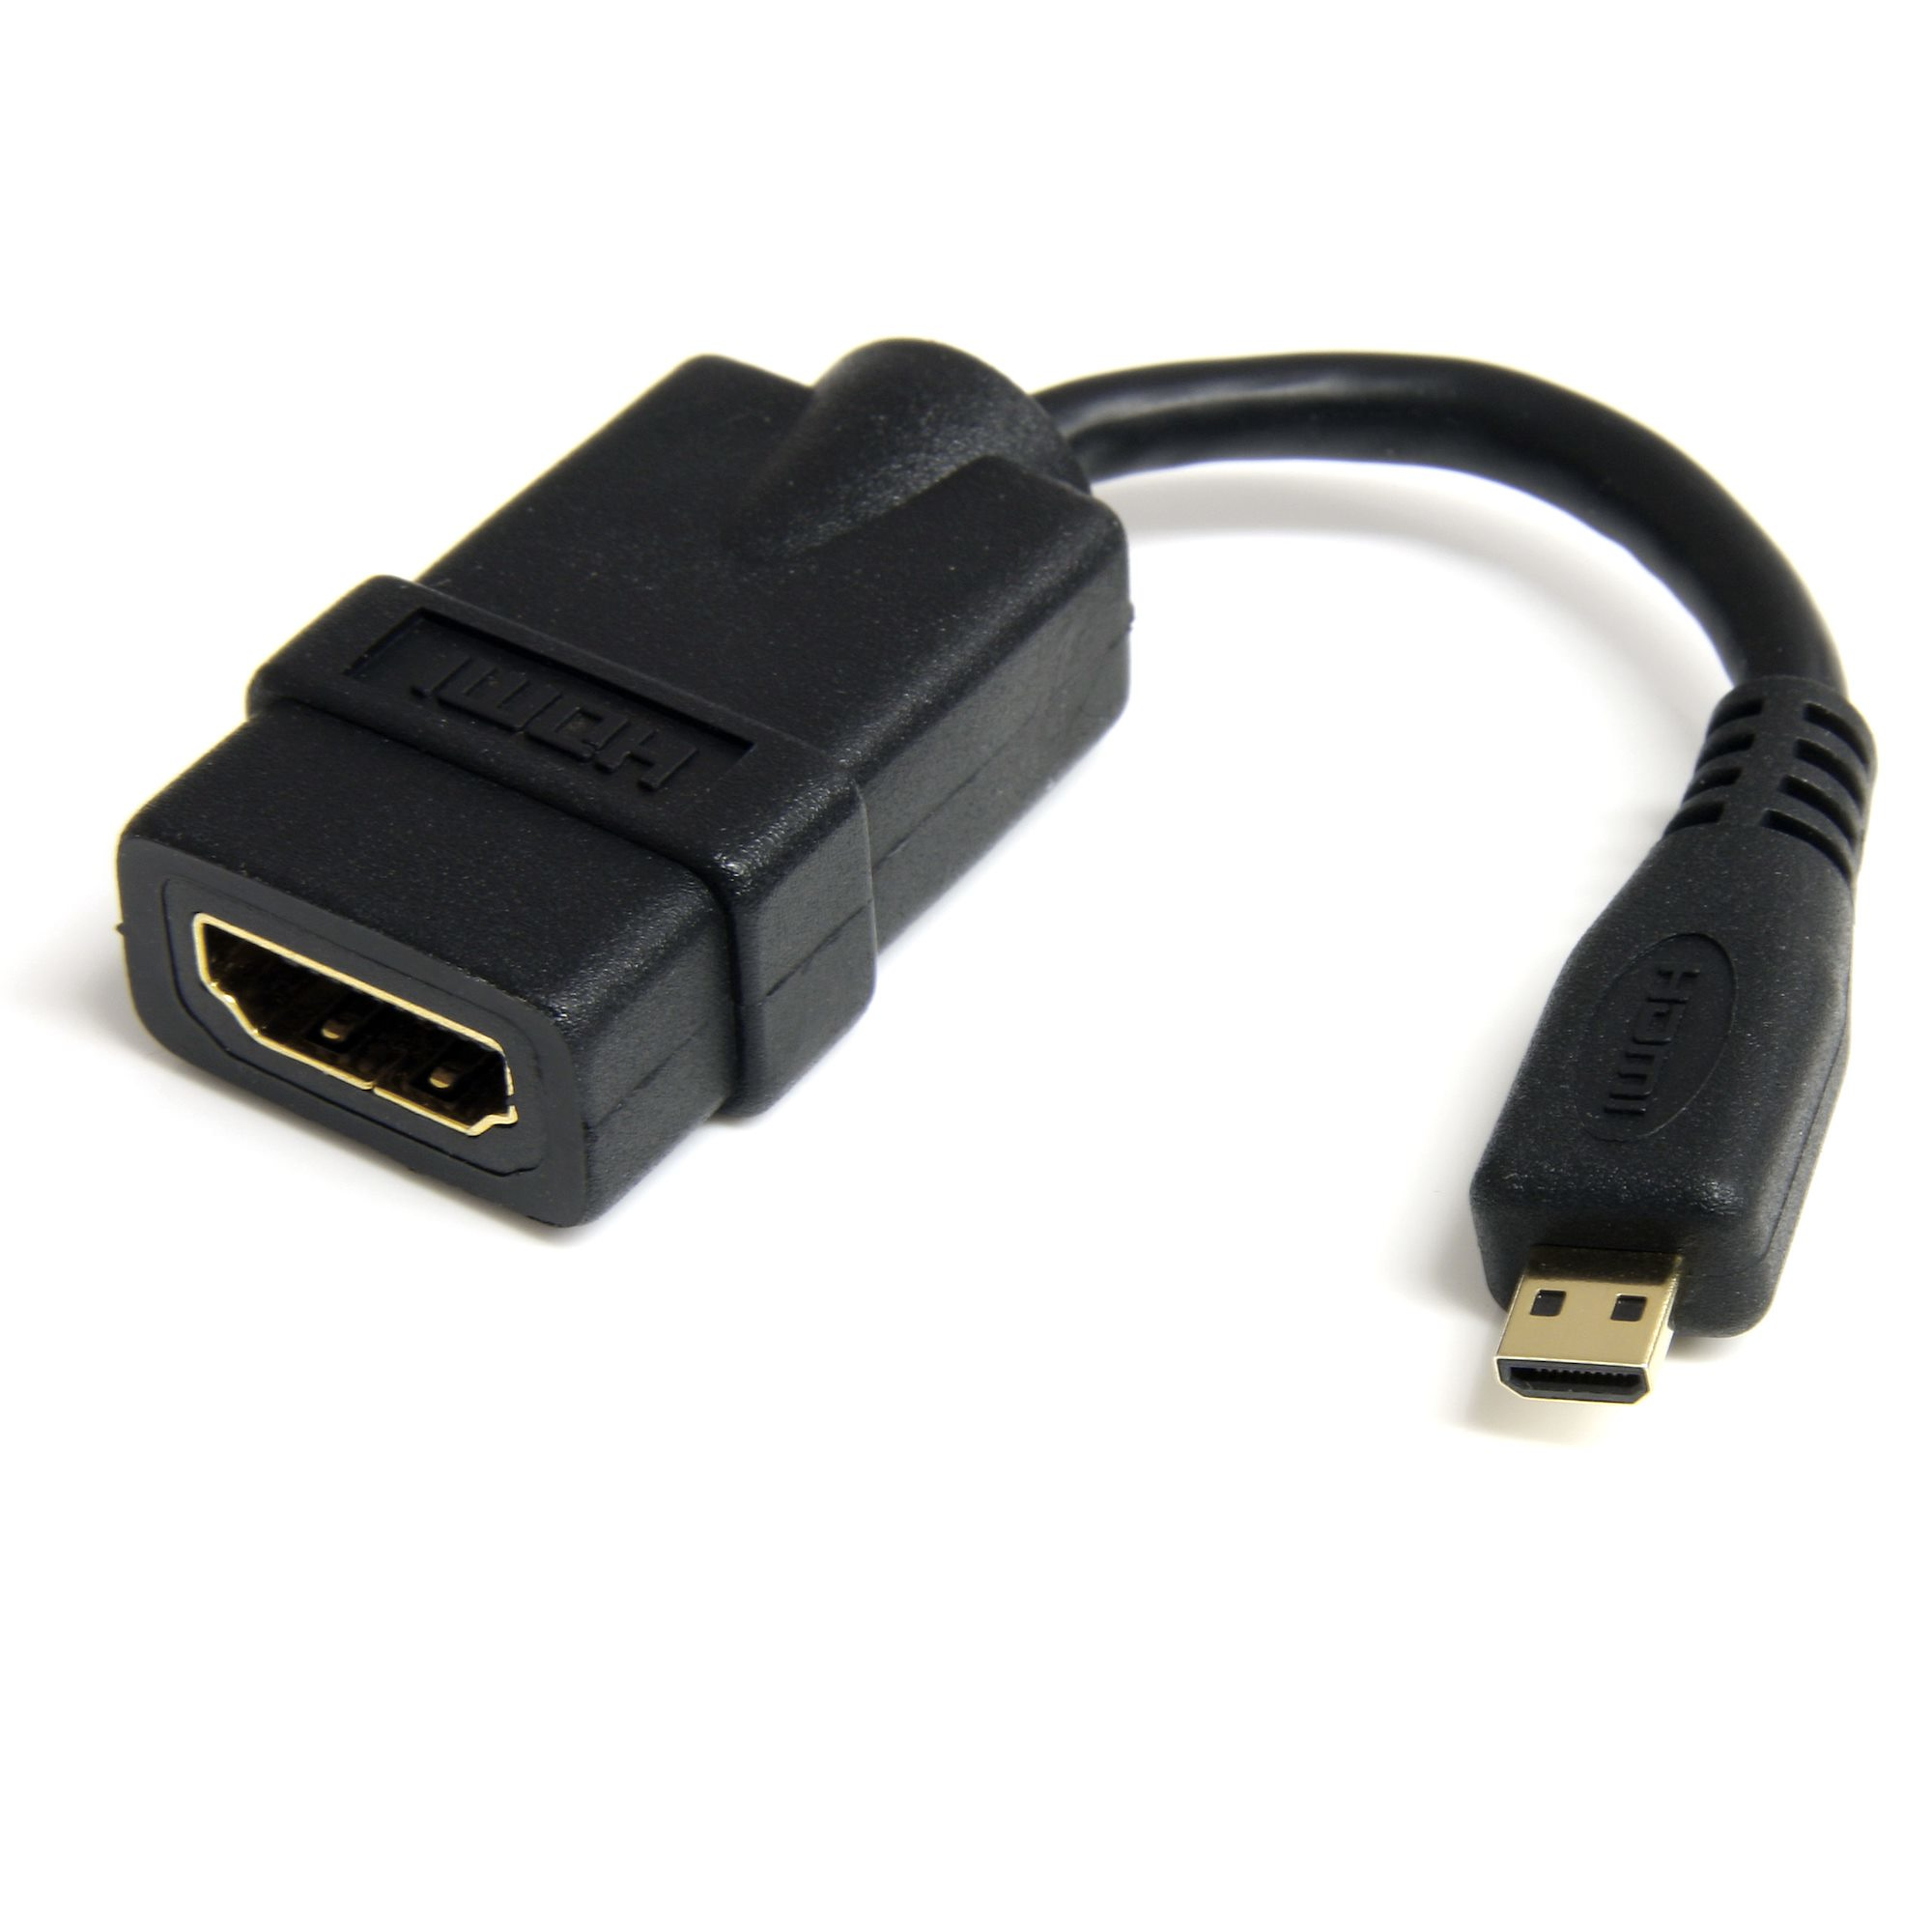 StarTech.com Micro HDMI to HDMI Adapter - 4K 30Hz Video - Durable High Speed Micro HDMI Type-D to HDMI 1.4 Converter/Cable Adapter Dongle - Ultra HD HDMI Monitors, TVs & Displays - M/F